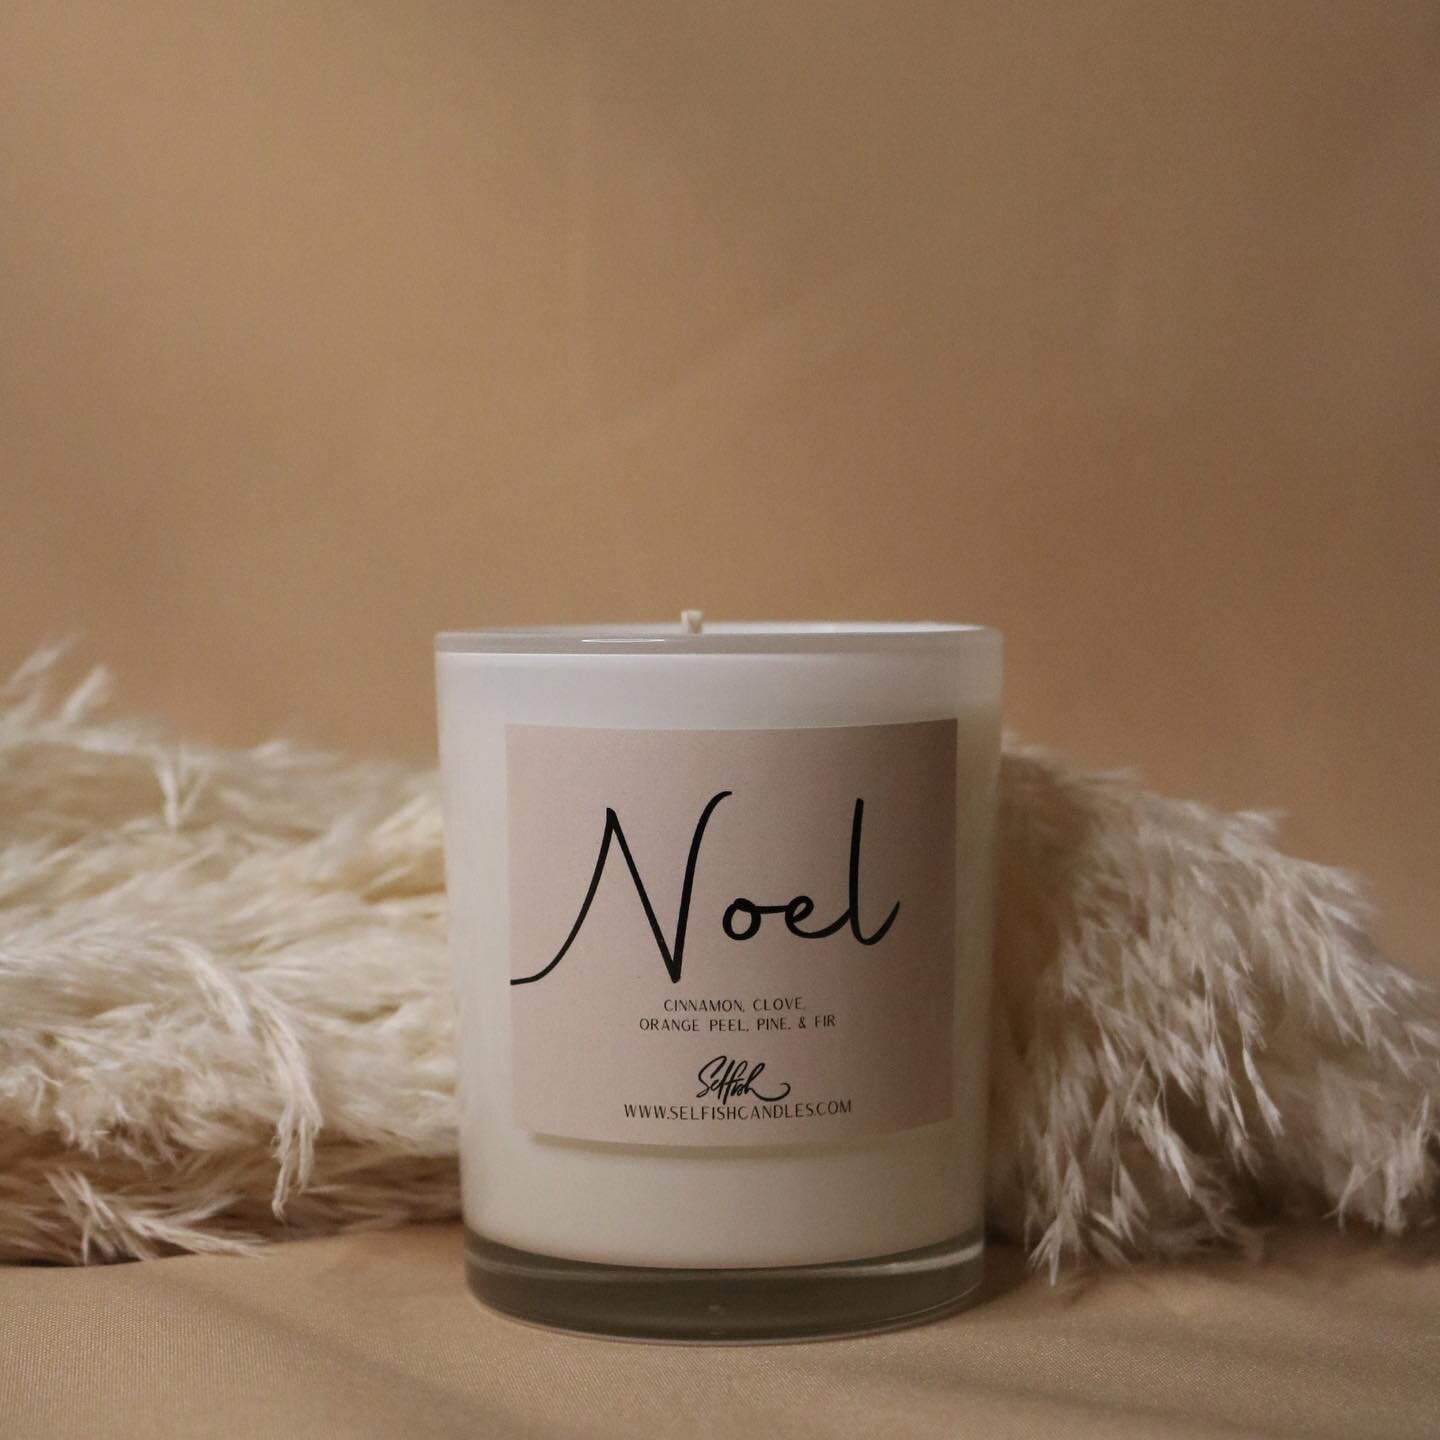 Noel is one our favorites even after Christmas! The notes of Orange spice along with the Pine and Fir are great to warm up your space during these cooler months.
&bull;
&bull;
&bull;
#sundayvibes #selfcare #selfish #candles